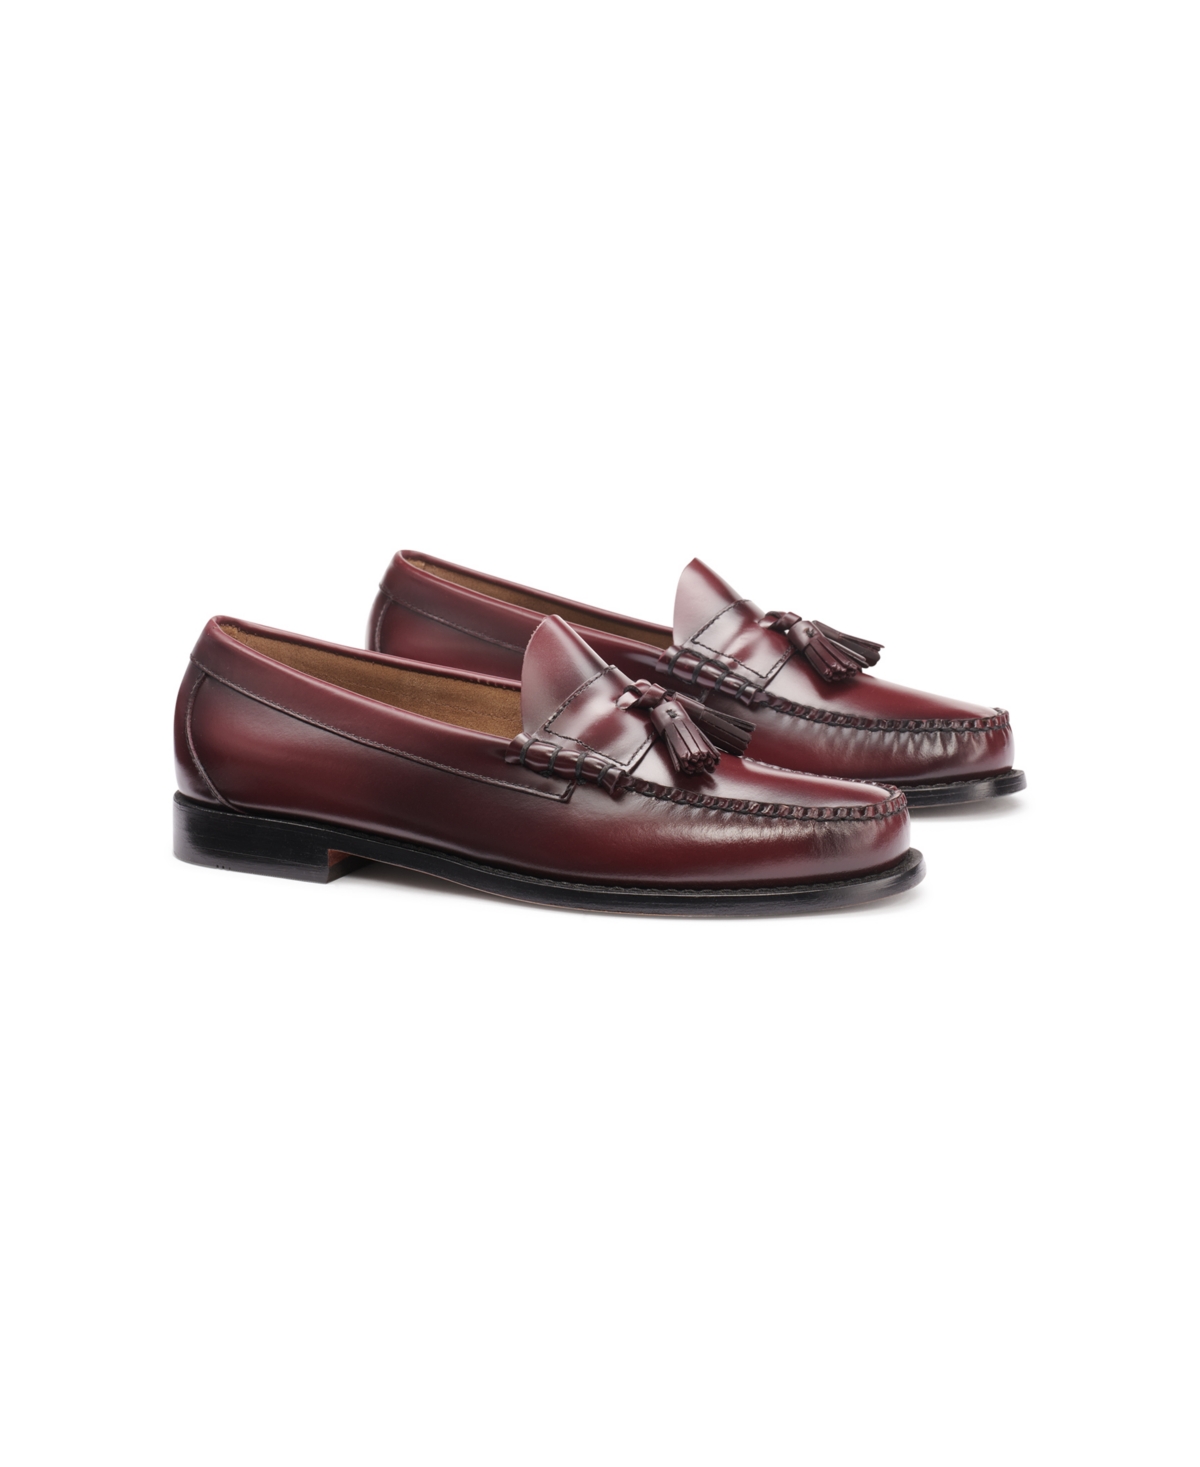 Gh Bass G.h.bass Men's Lennox Weejuns Tassel Loafers In Wine